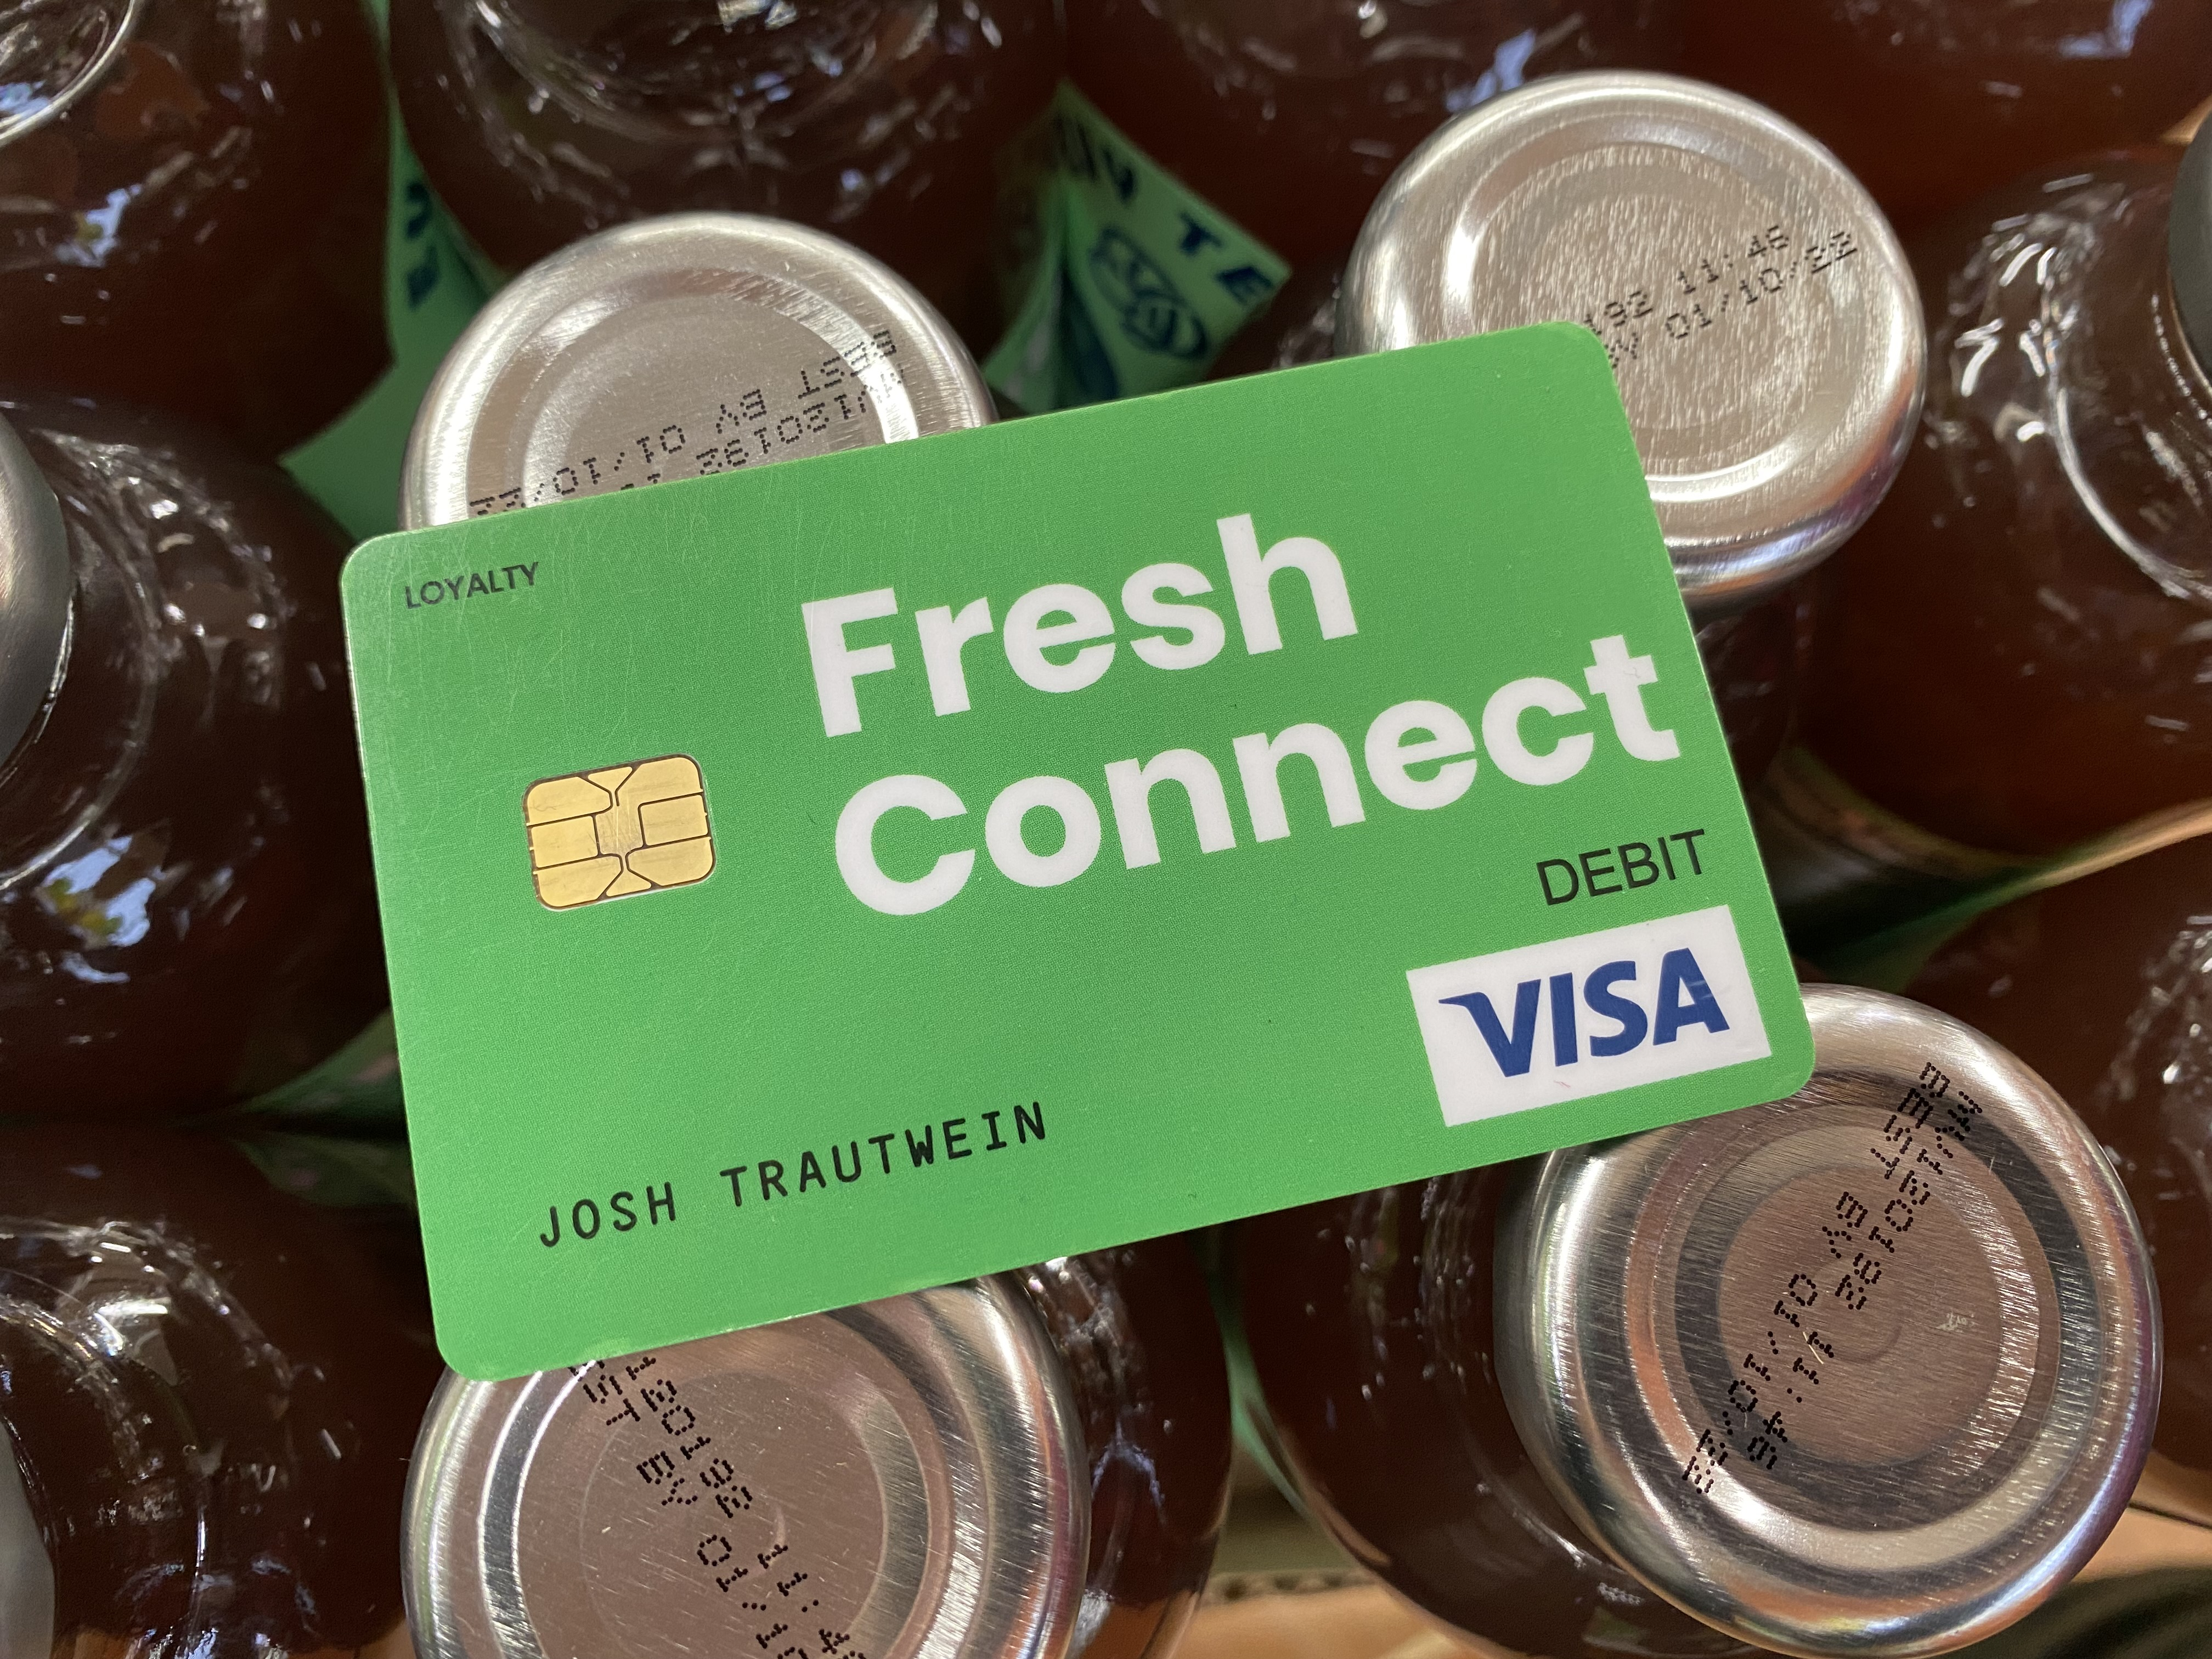 The Fresh Connect card. (Janelle Nanos)